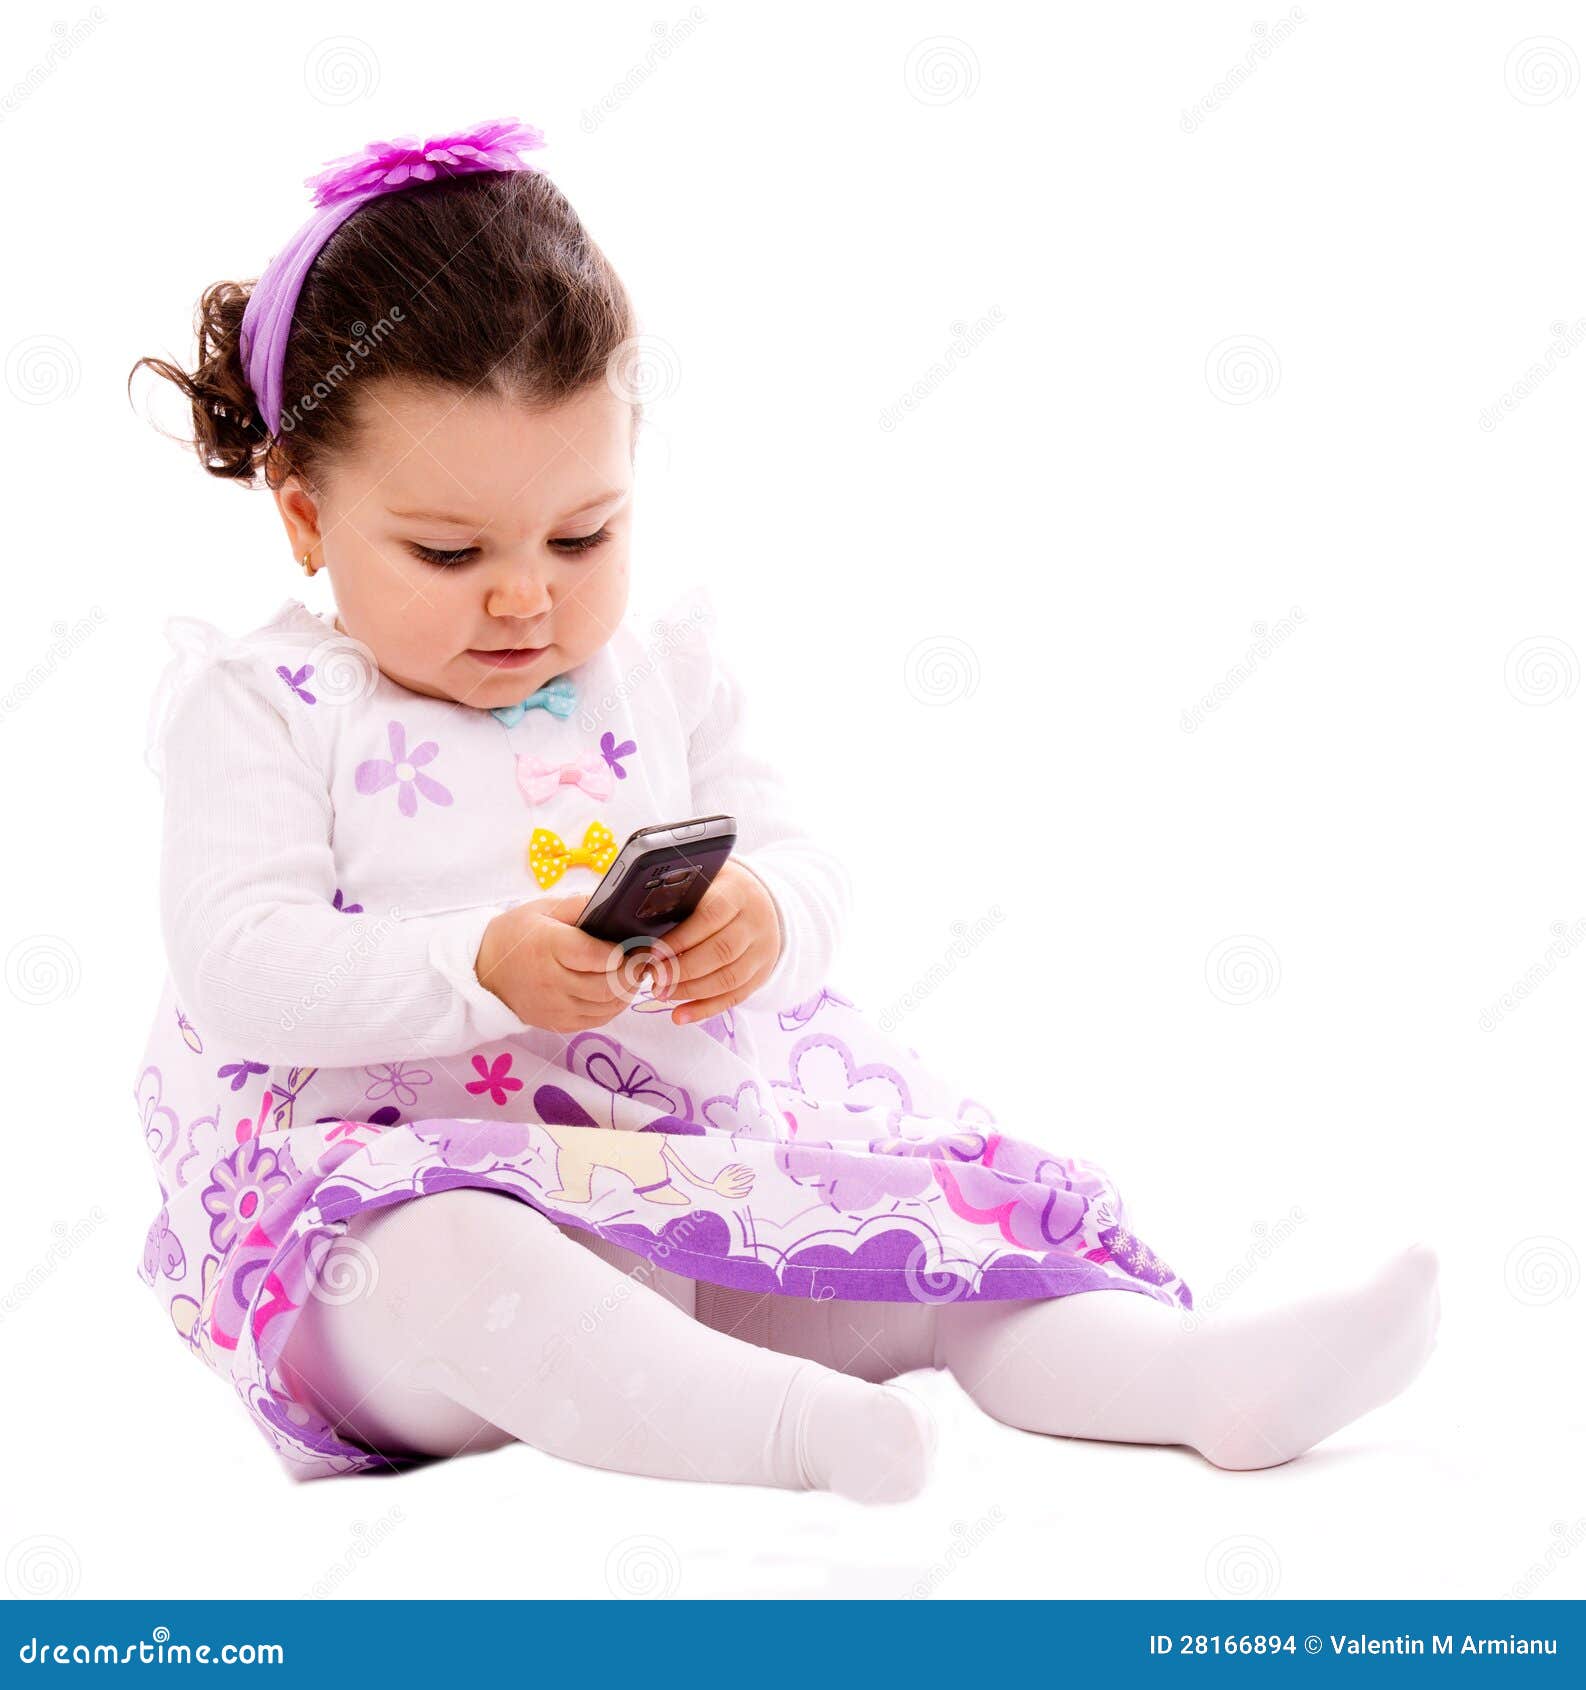 baby with mobile